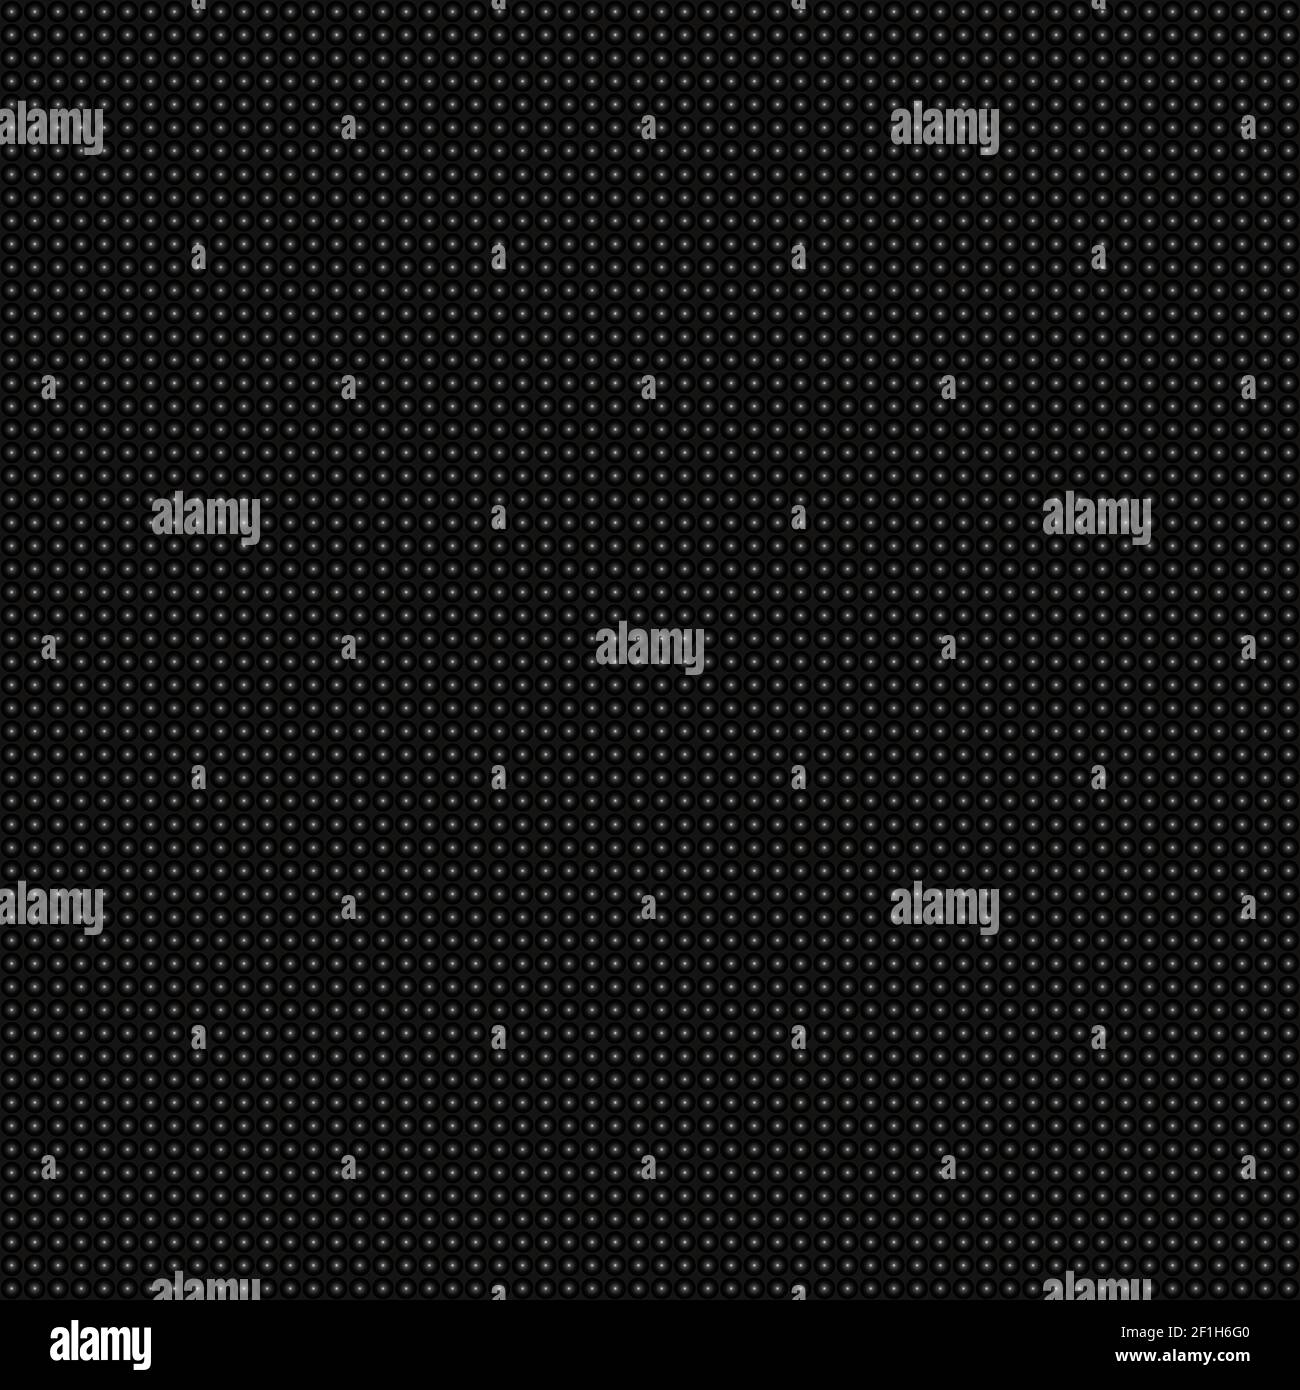 Seamless vector texture gradient with white dots. Stock Photo